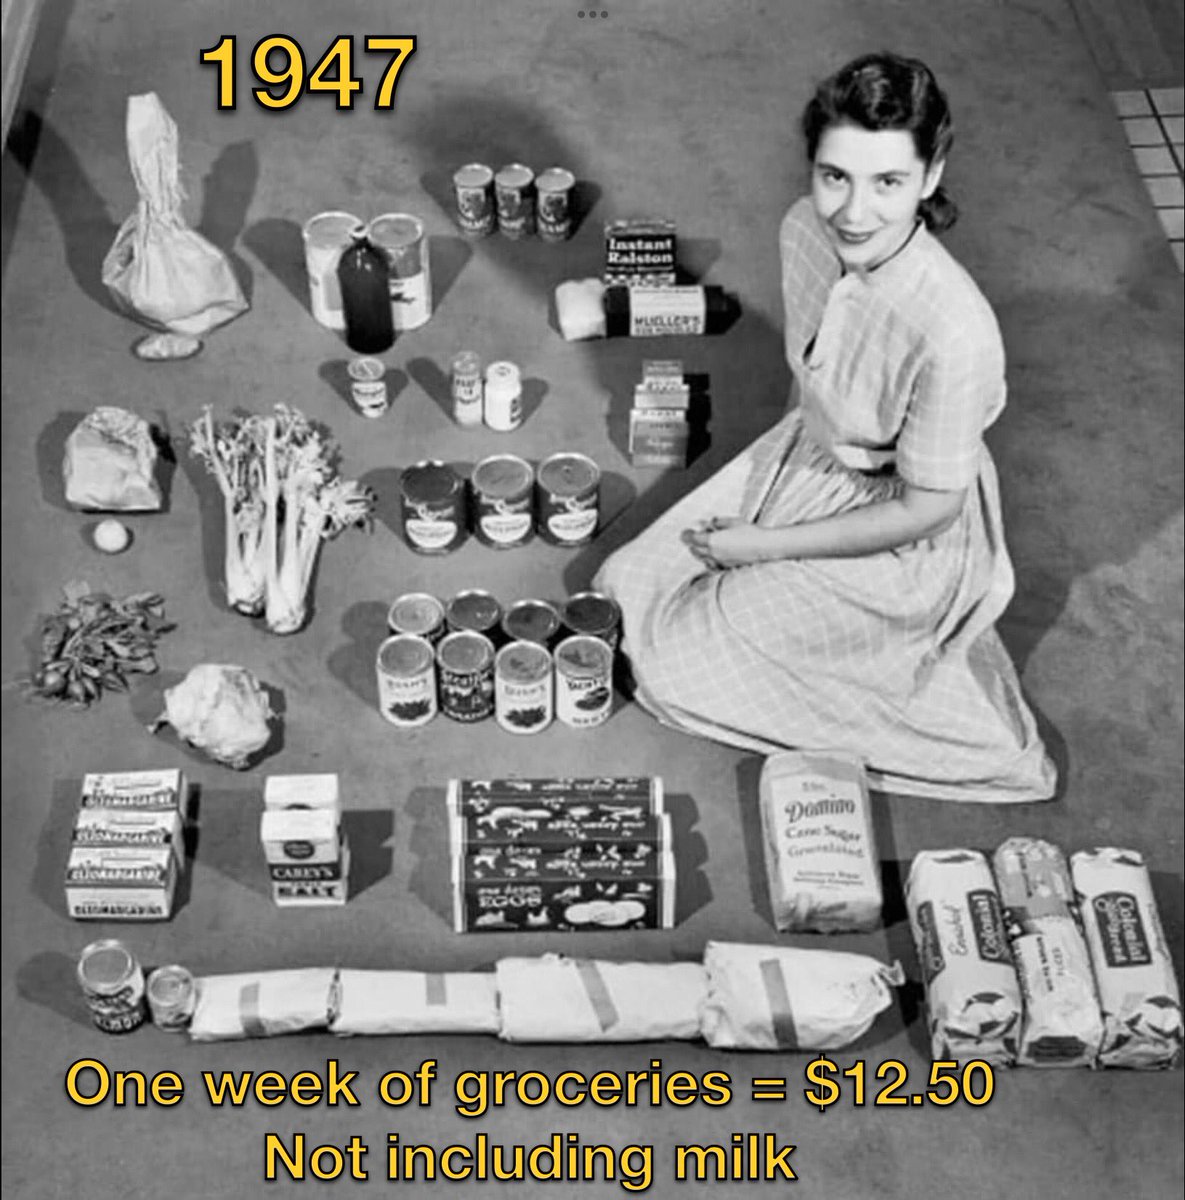 ✳️The year was 1947 and this homemaker bought a week’s worth of groceries for $12.50. That didn’t count the milk because I guess the milkman still delivered back then. 💥So when you bought groceries last week in this economy rife with Bidenflation, what did it cost you?